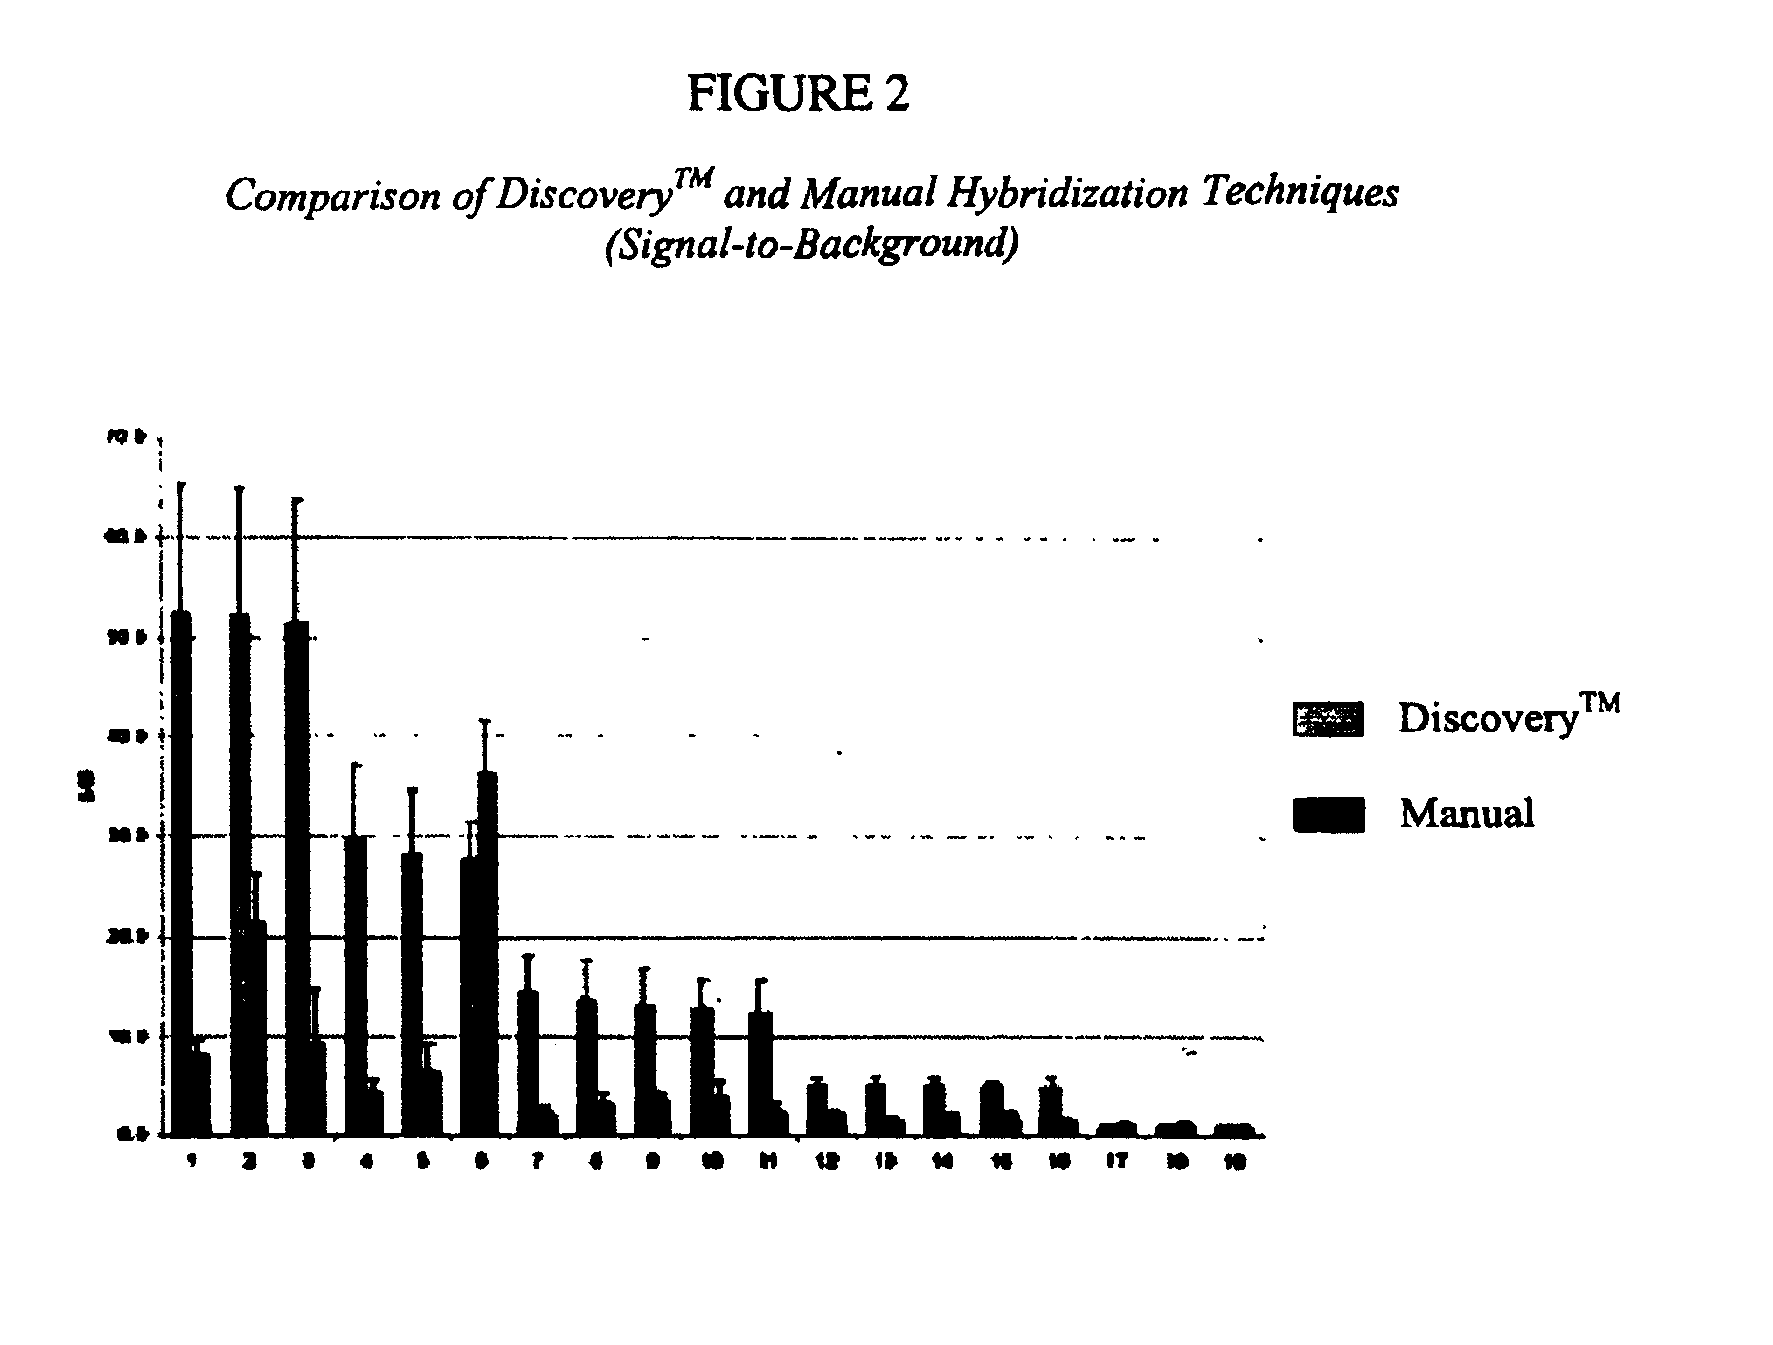 Reagents and methods for automated hybridization